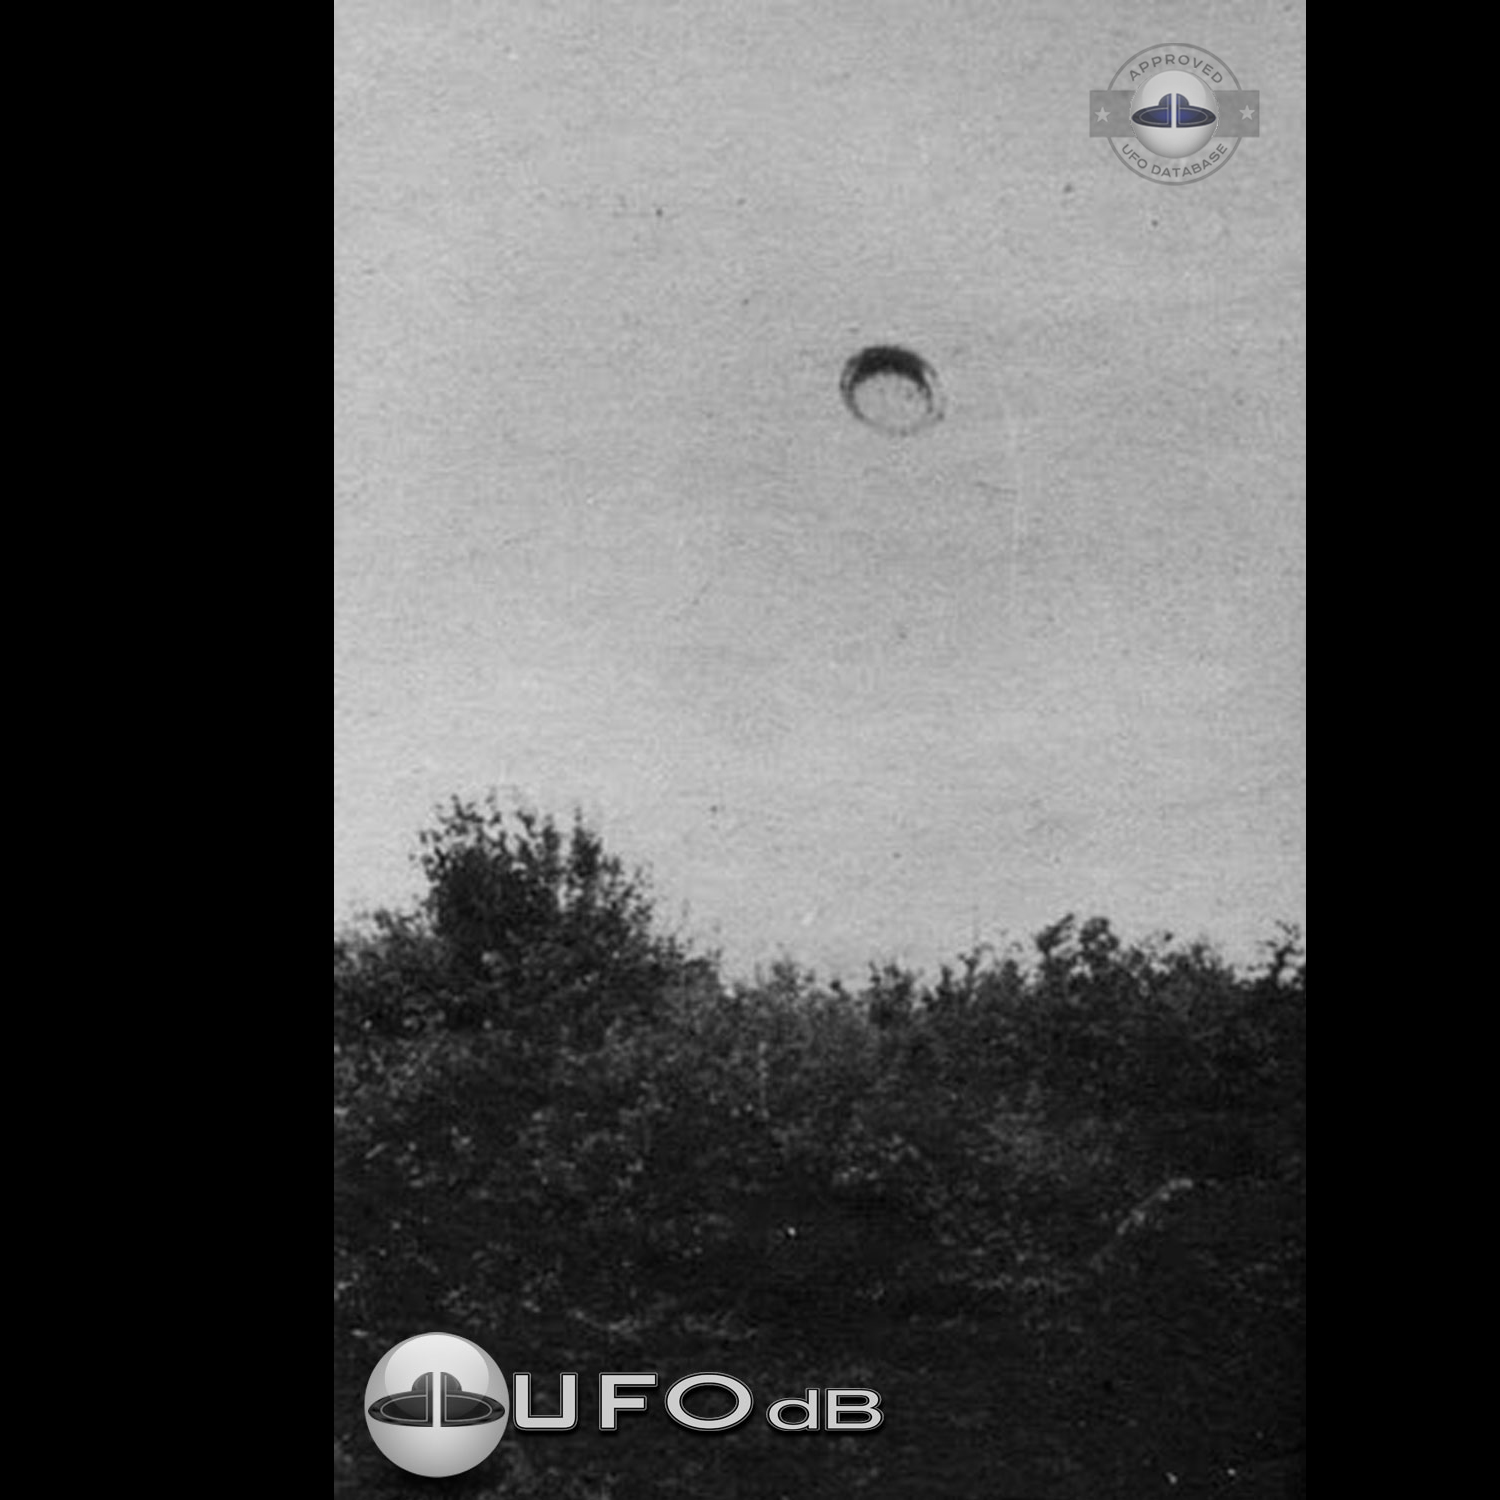 The ufo move slowly with his luminosity growing to suddenly disappear UFO Picture #67-1